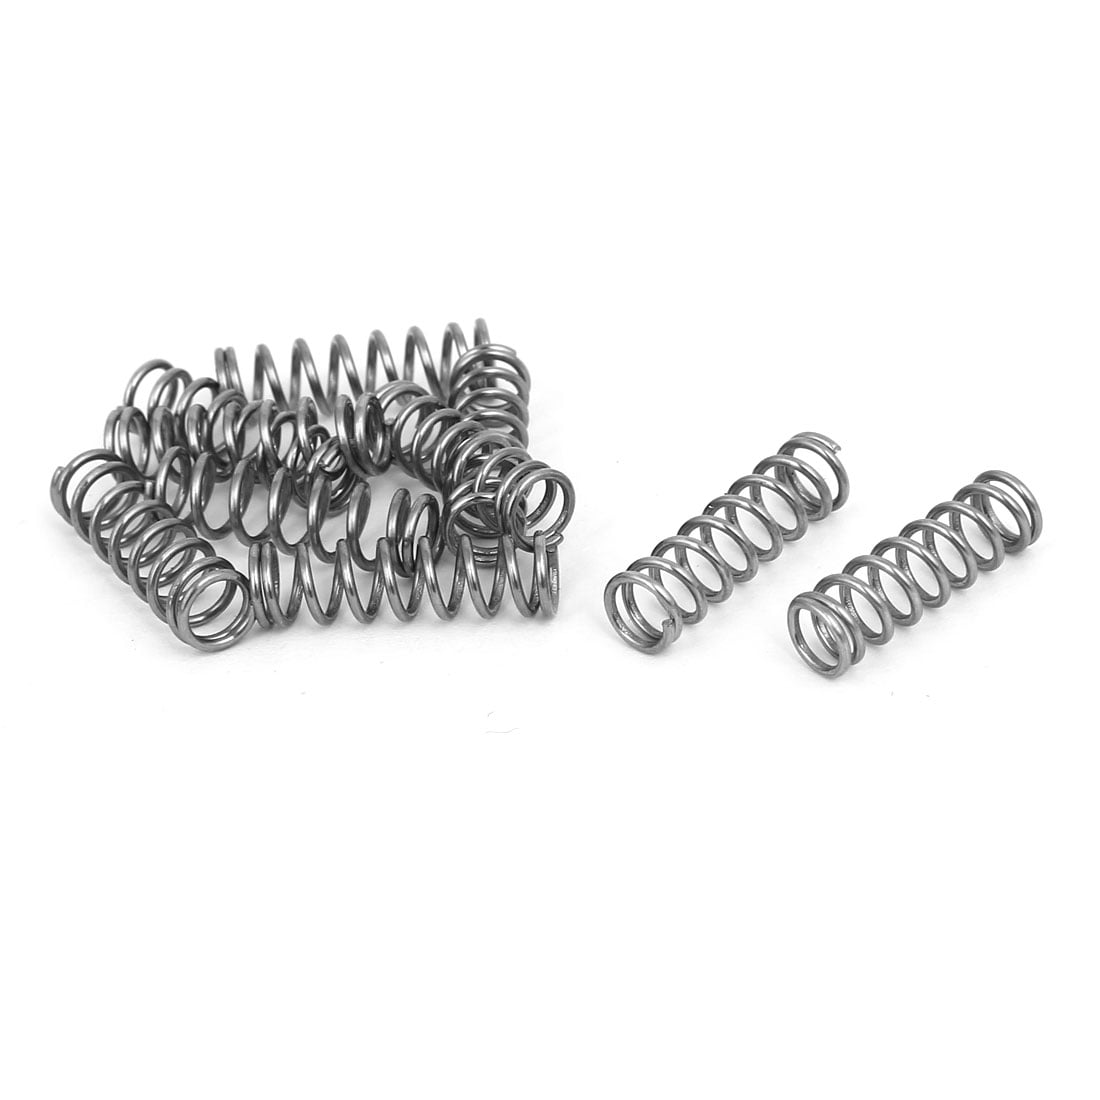 0.8mmx6mmx20mm 304 Stainless Steel Tension Springs Silver Tone 10pcs 